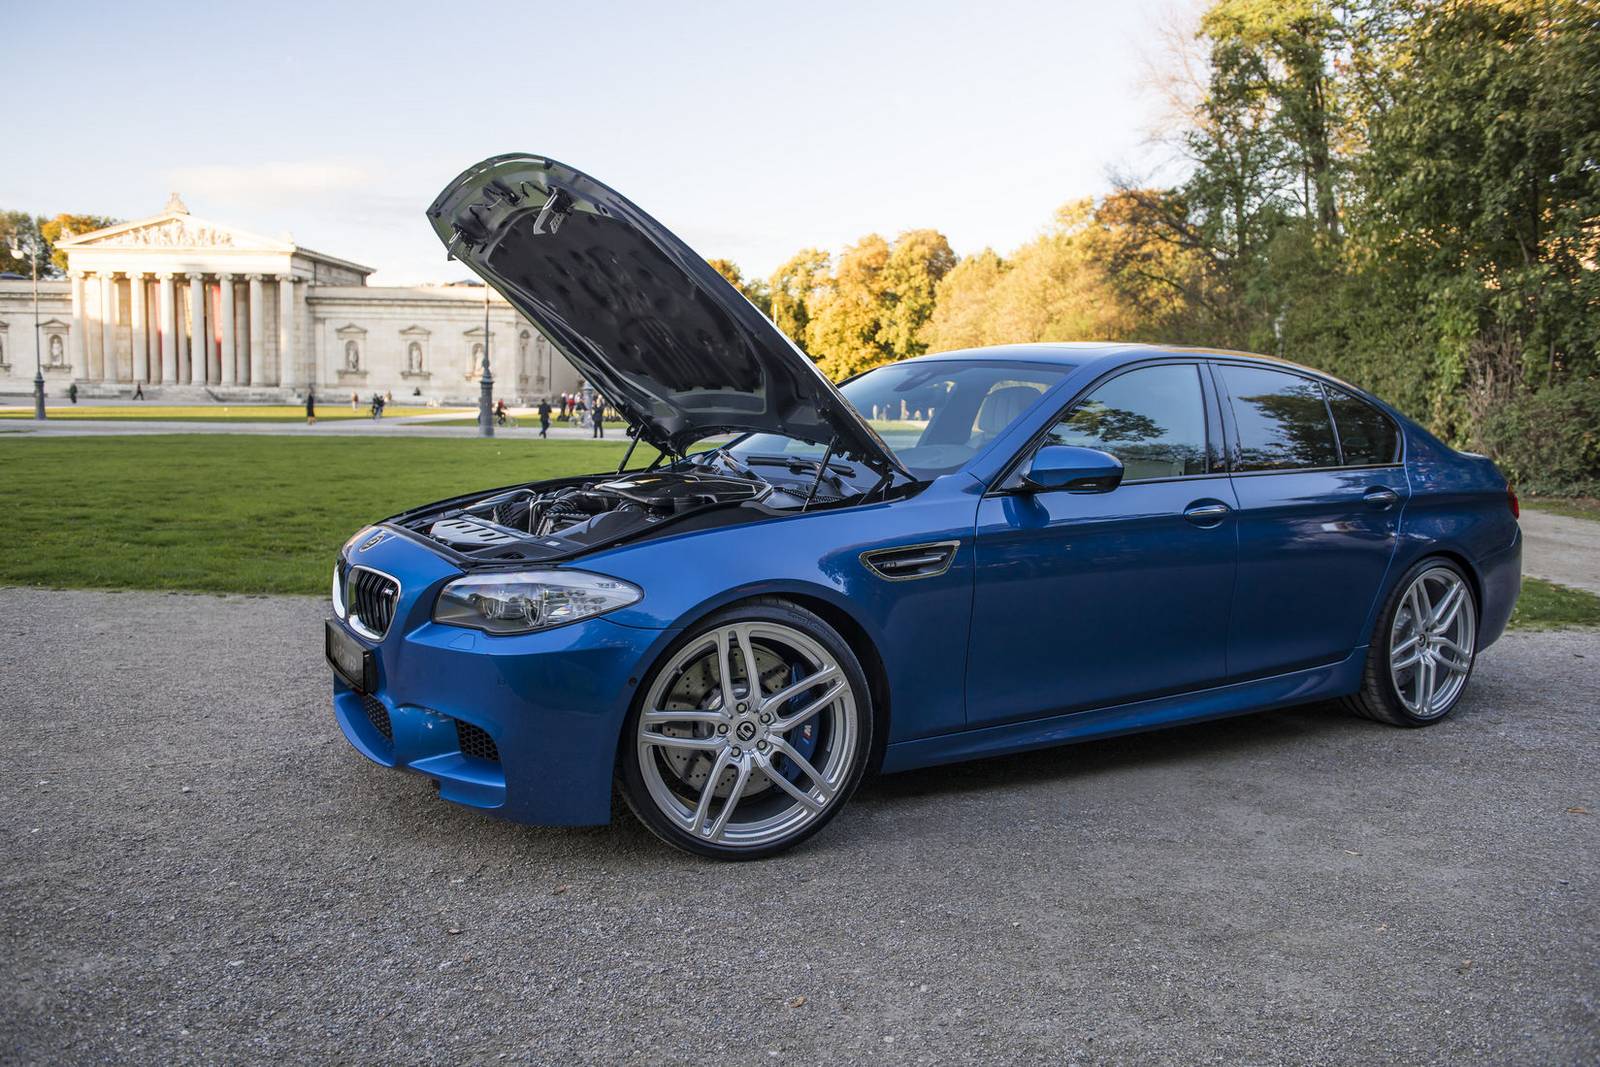 Official: G-Power BMW F10 M5 with 740hp - GTspirit